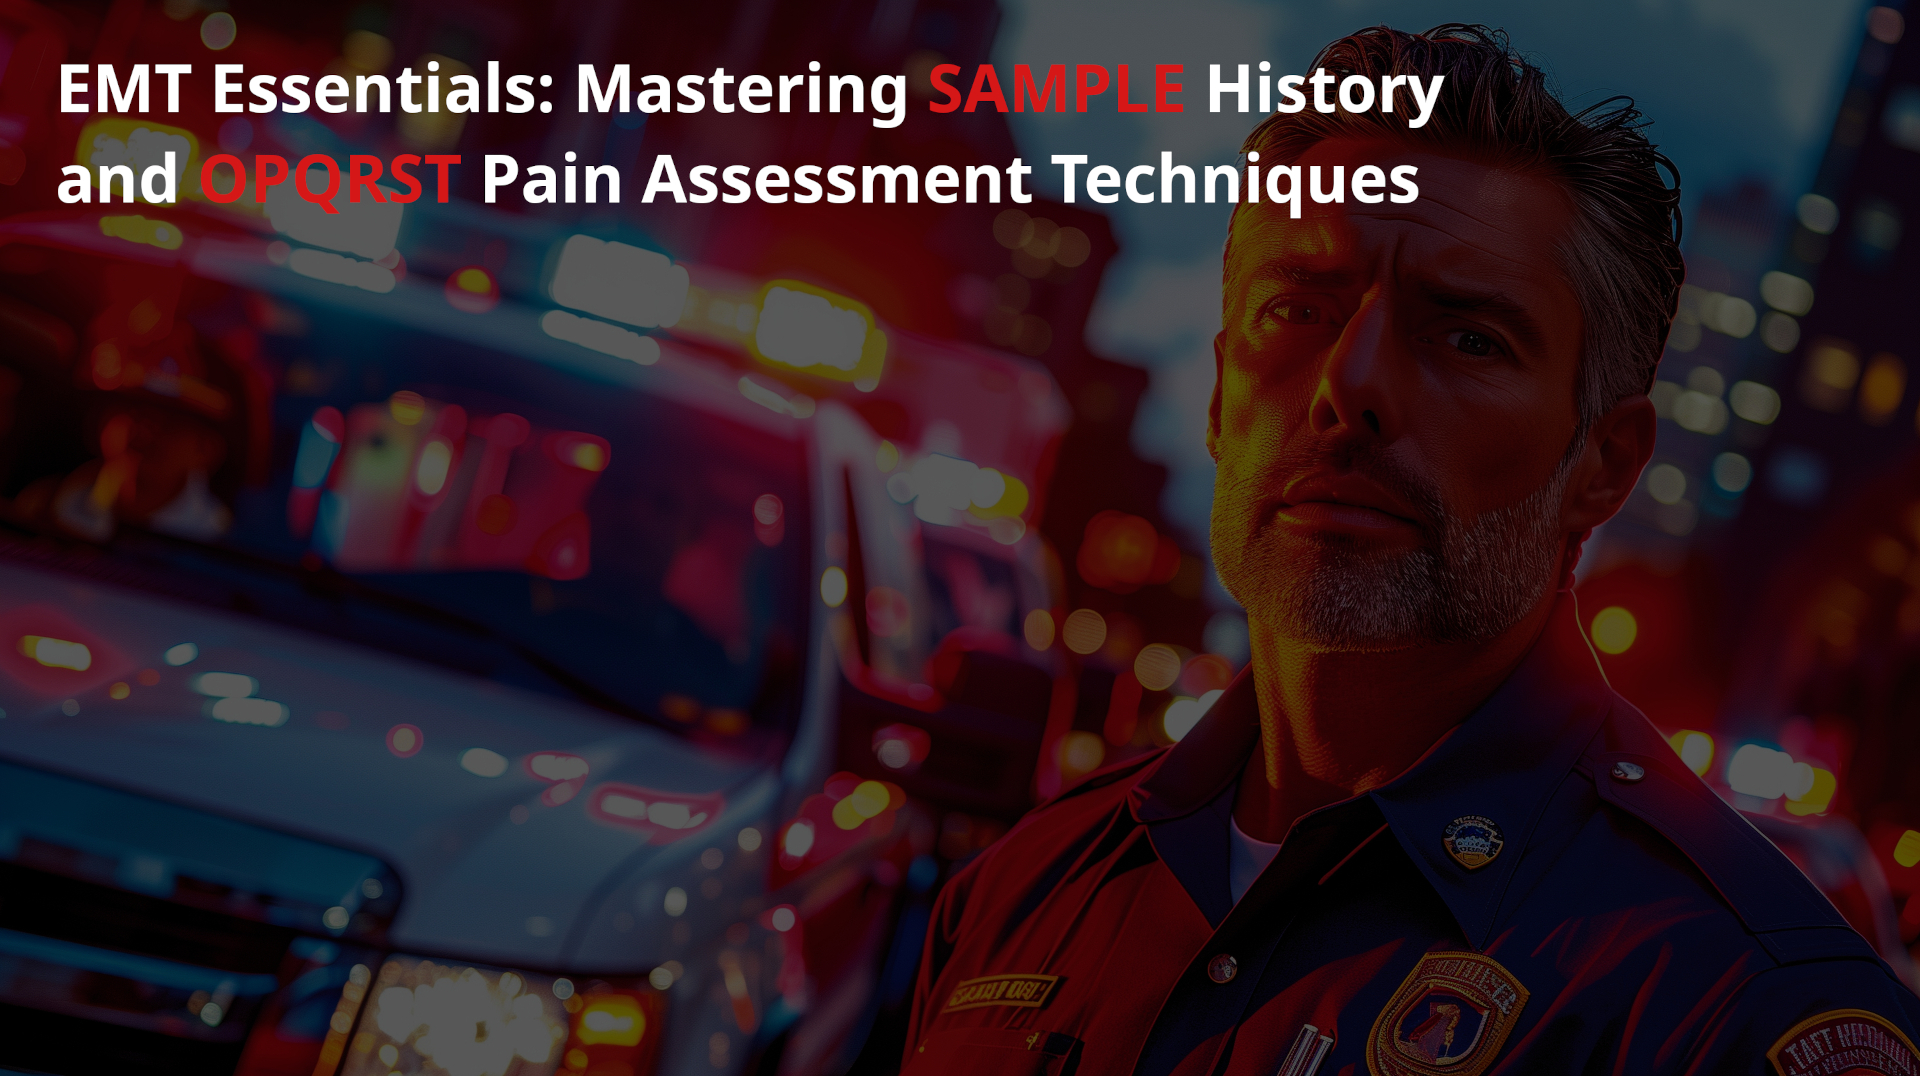 EMT Essentials: Mastering SAMPLE History and OPQRST Pain Assessment Techniques